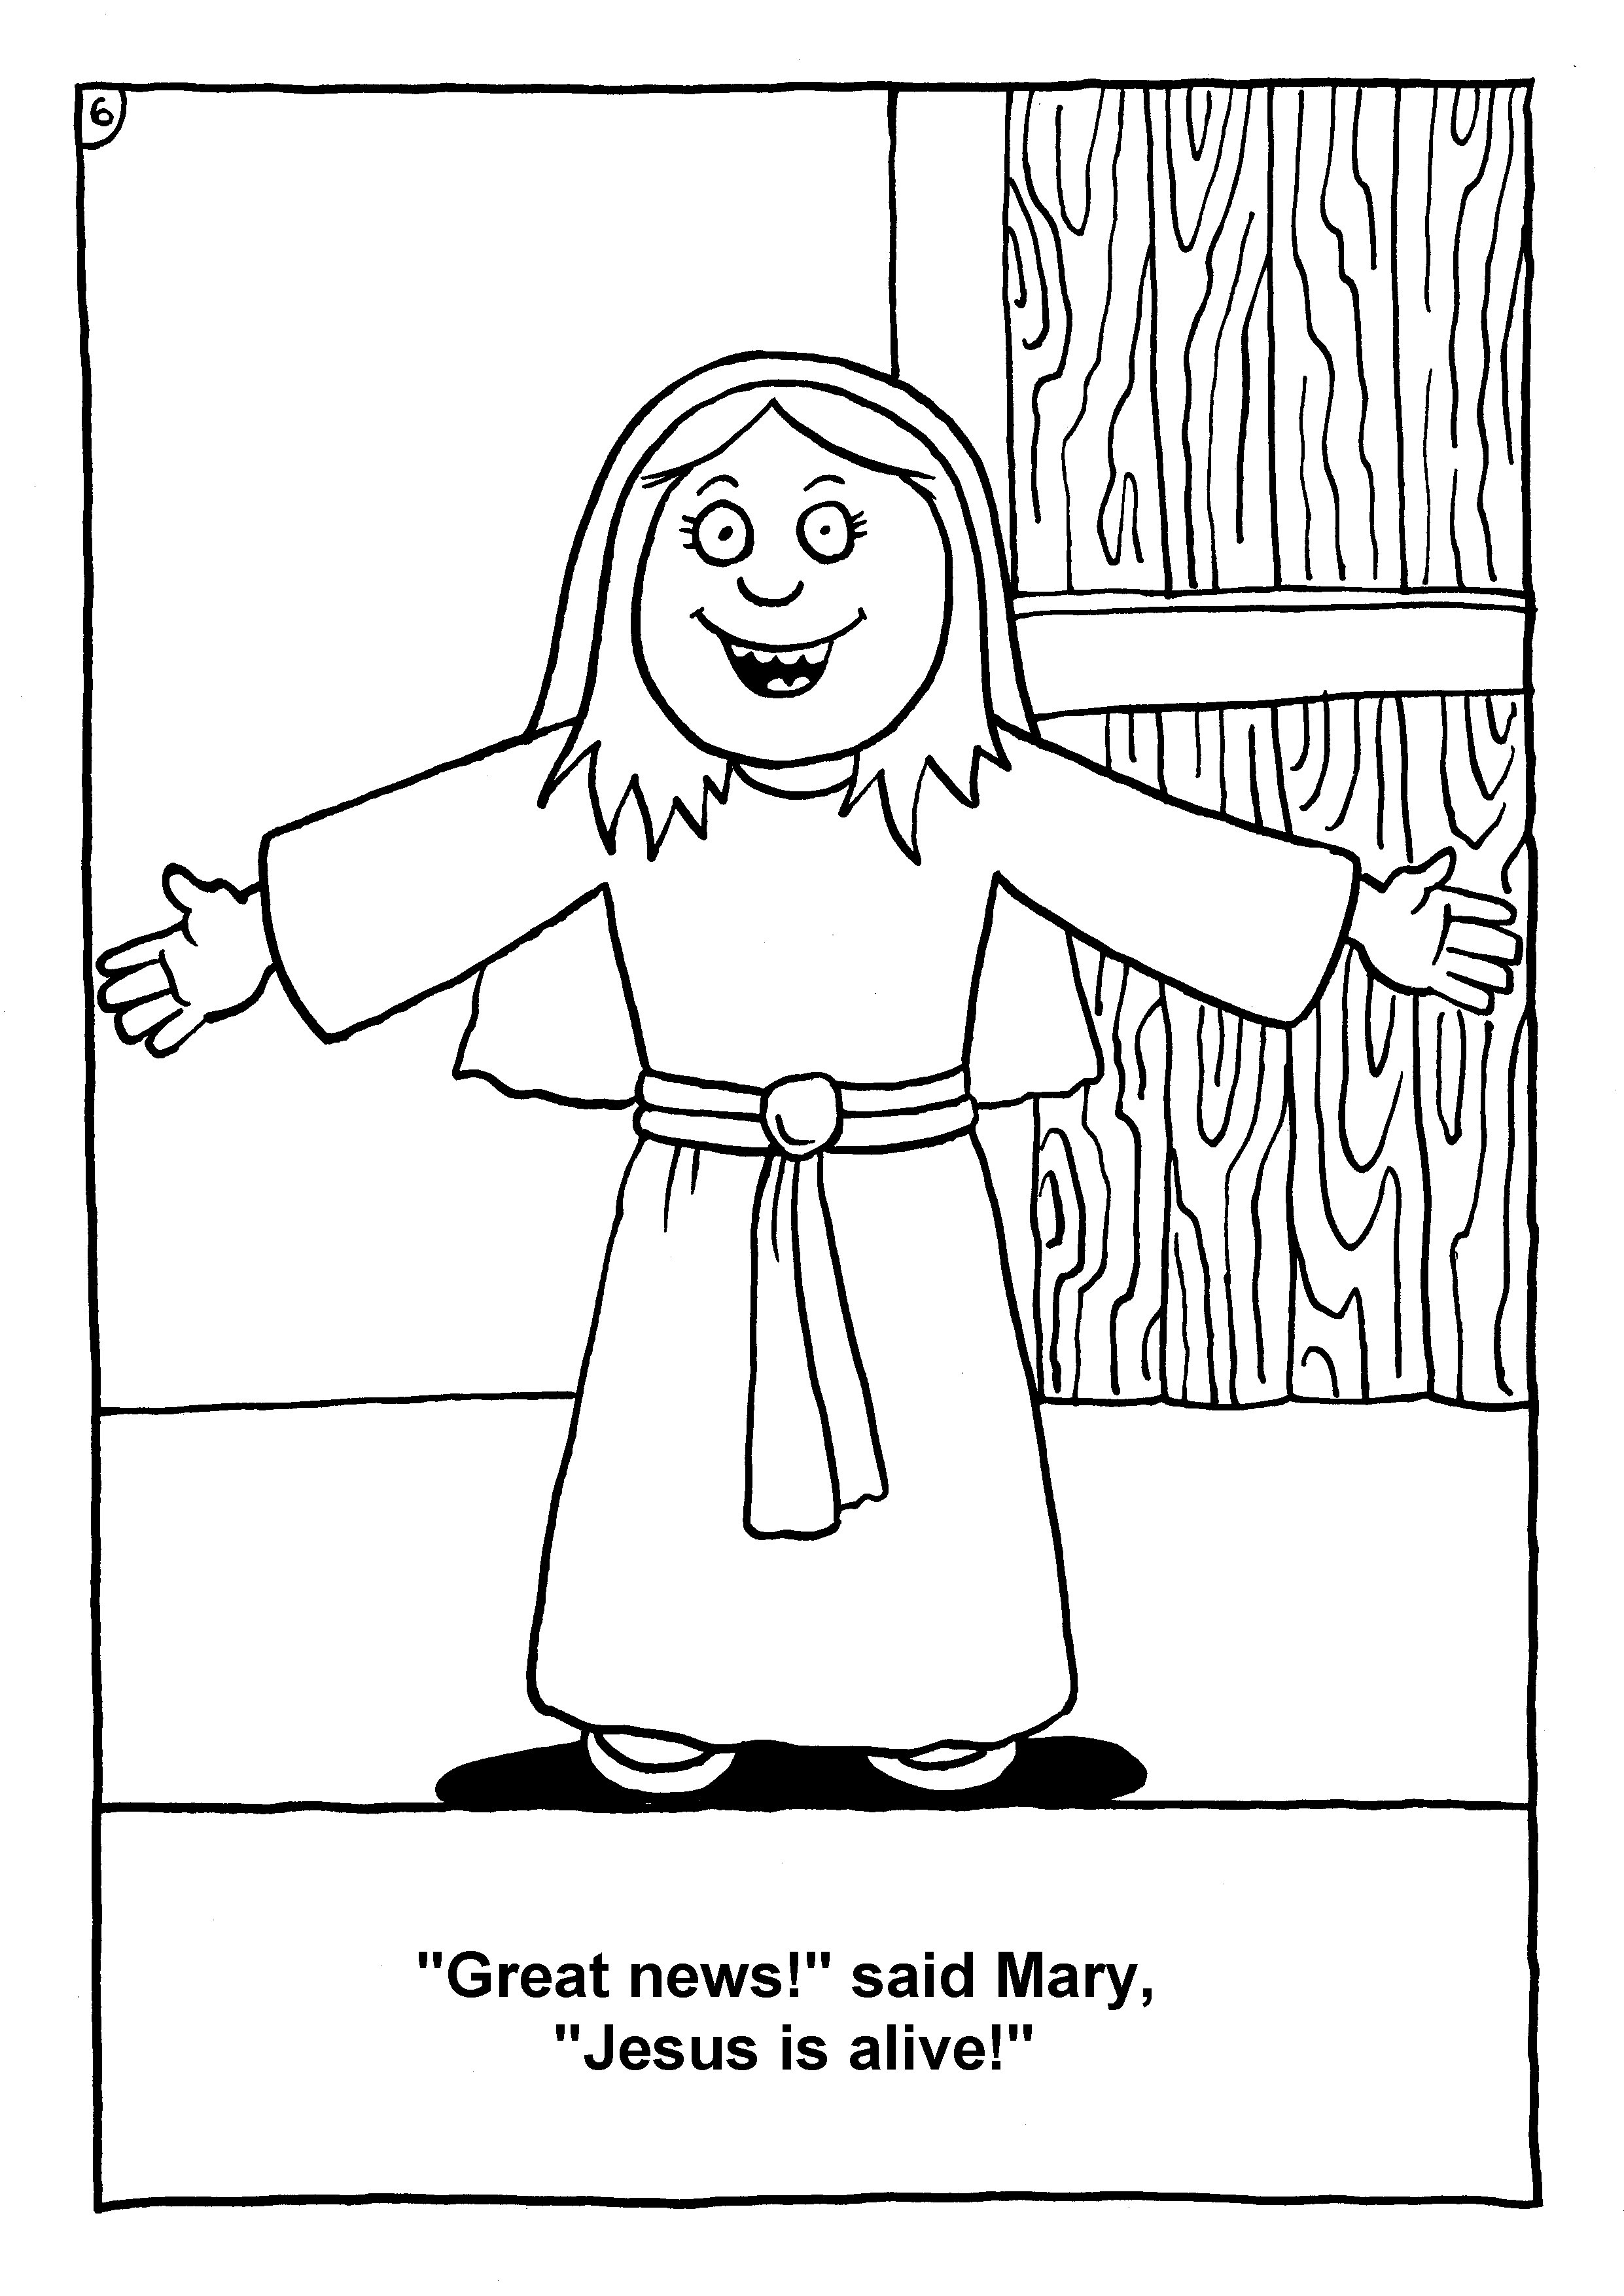 Art and craftcolouring in booksjesus is alive richard gunther â free christian resources